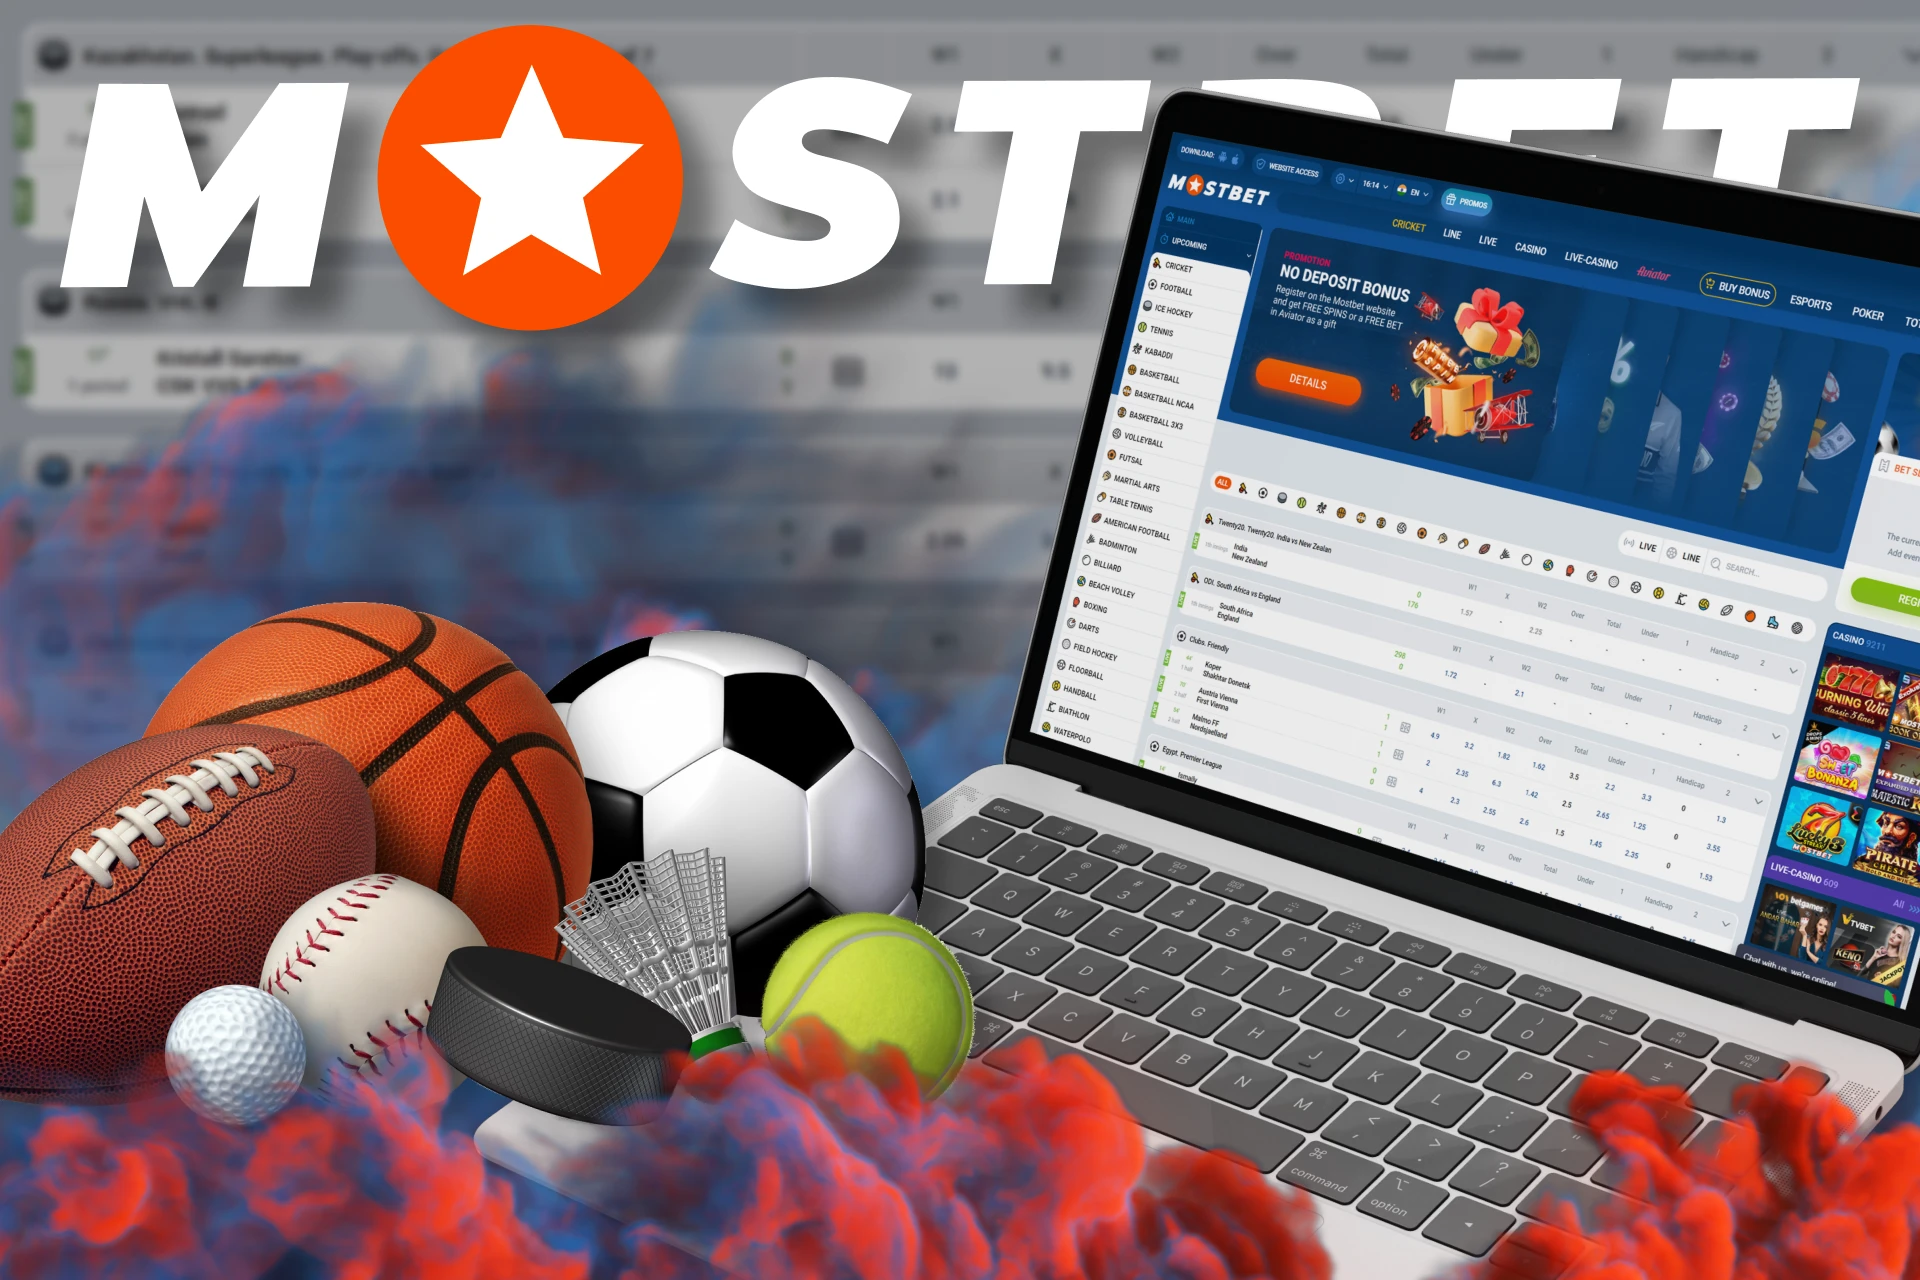 Place bets on various sports at Mostbet.